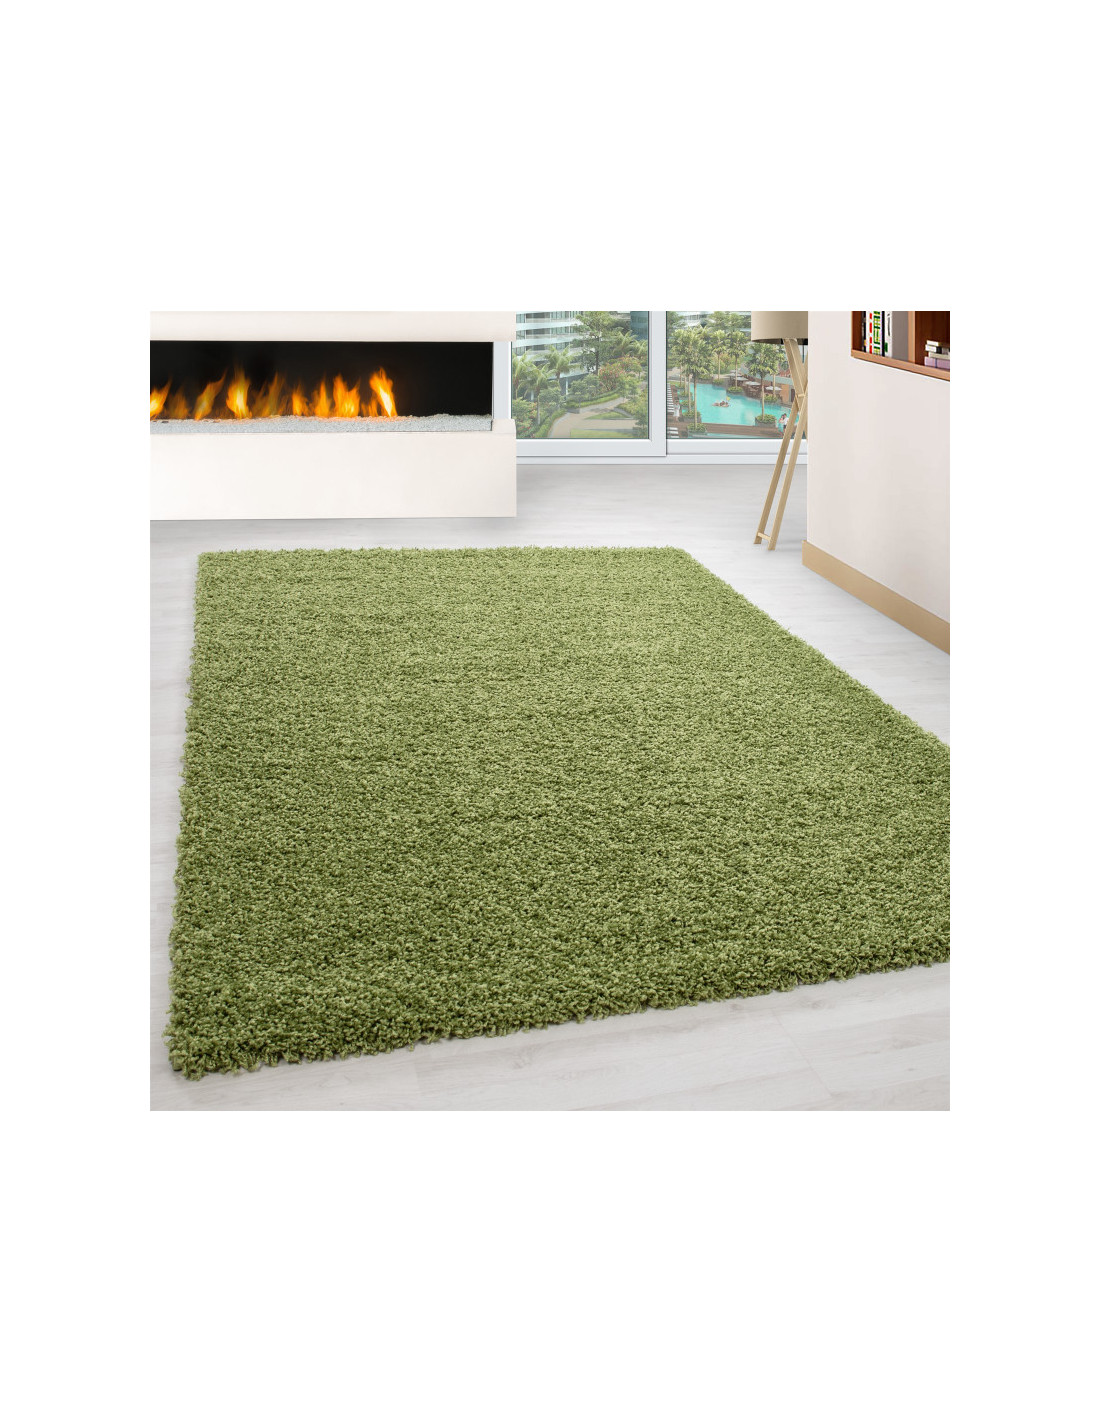 Living room rug, high pile, long pile, Shaggy pile height 3cm, solid green